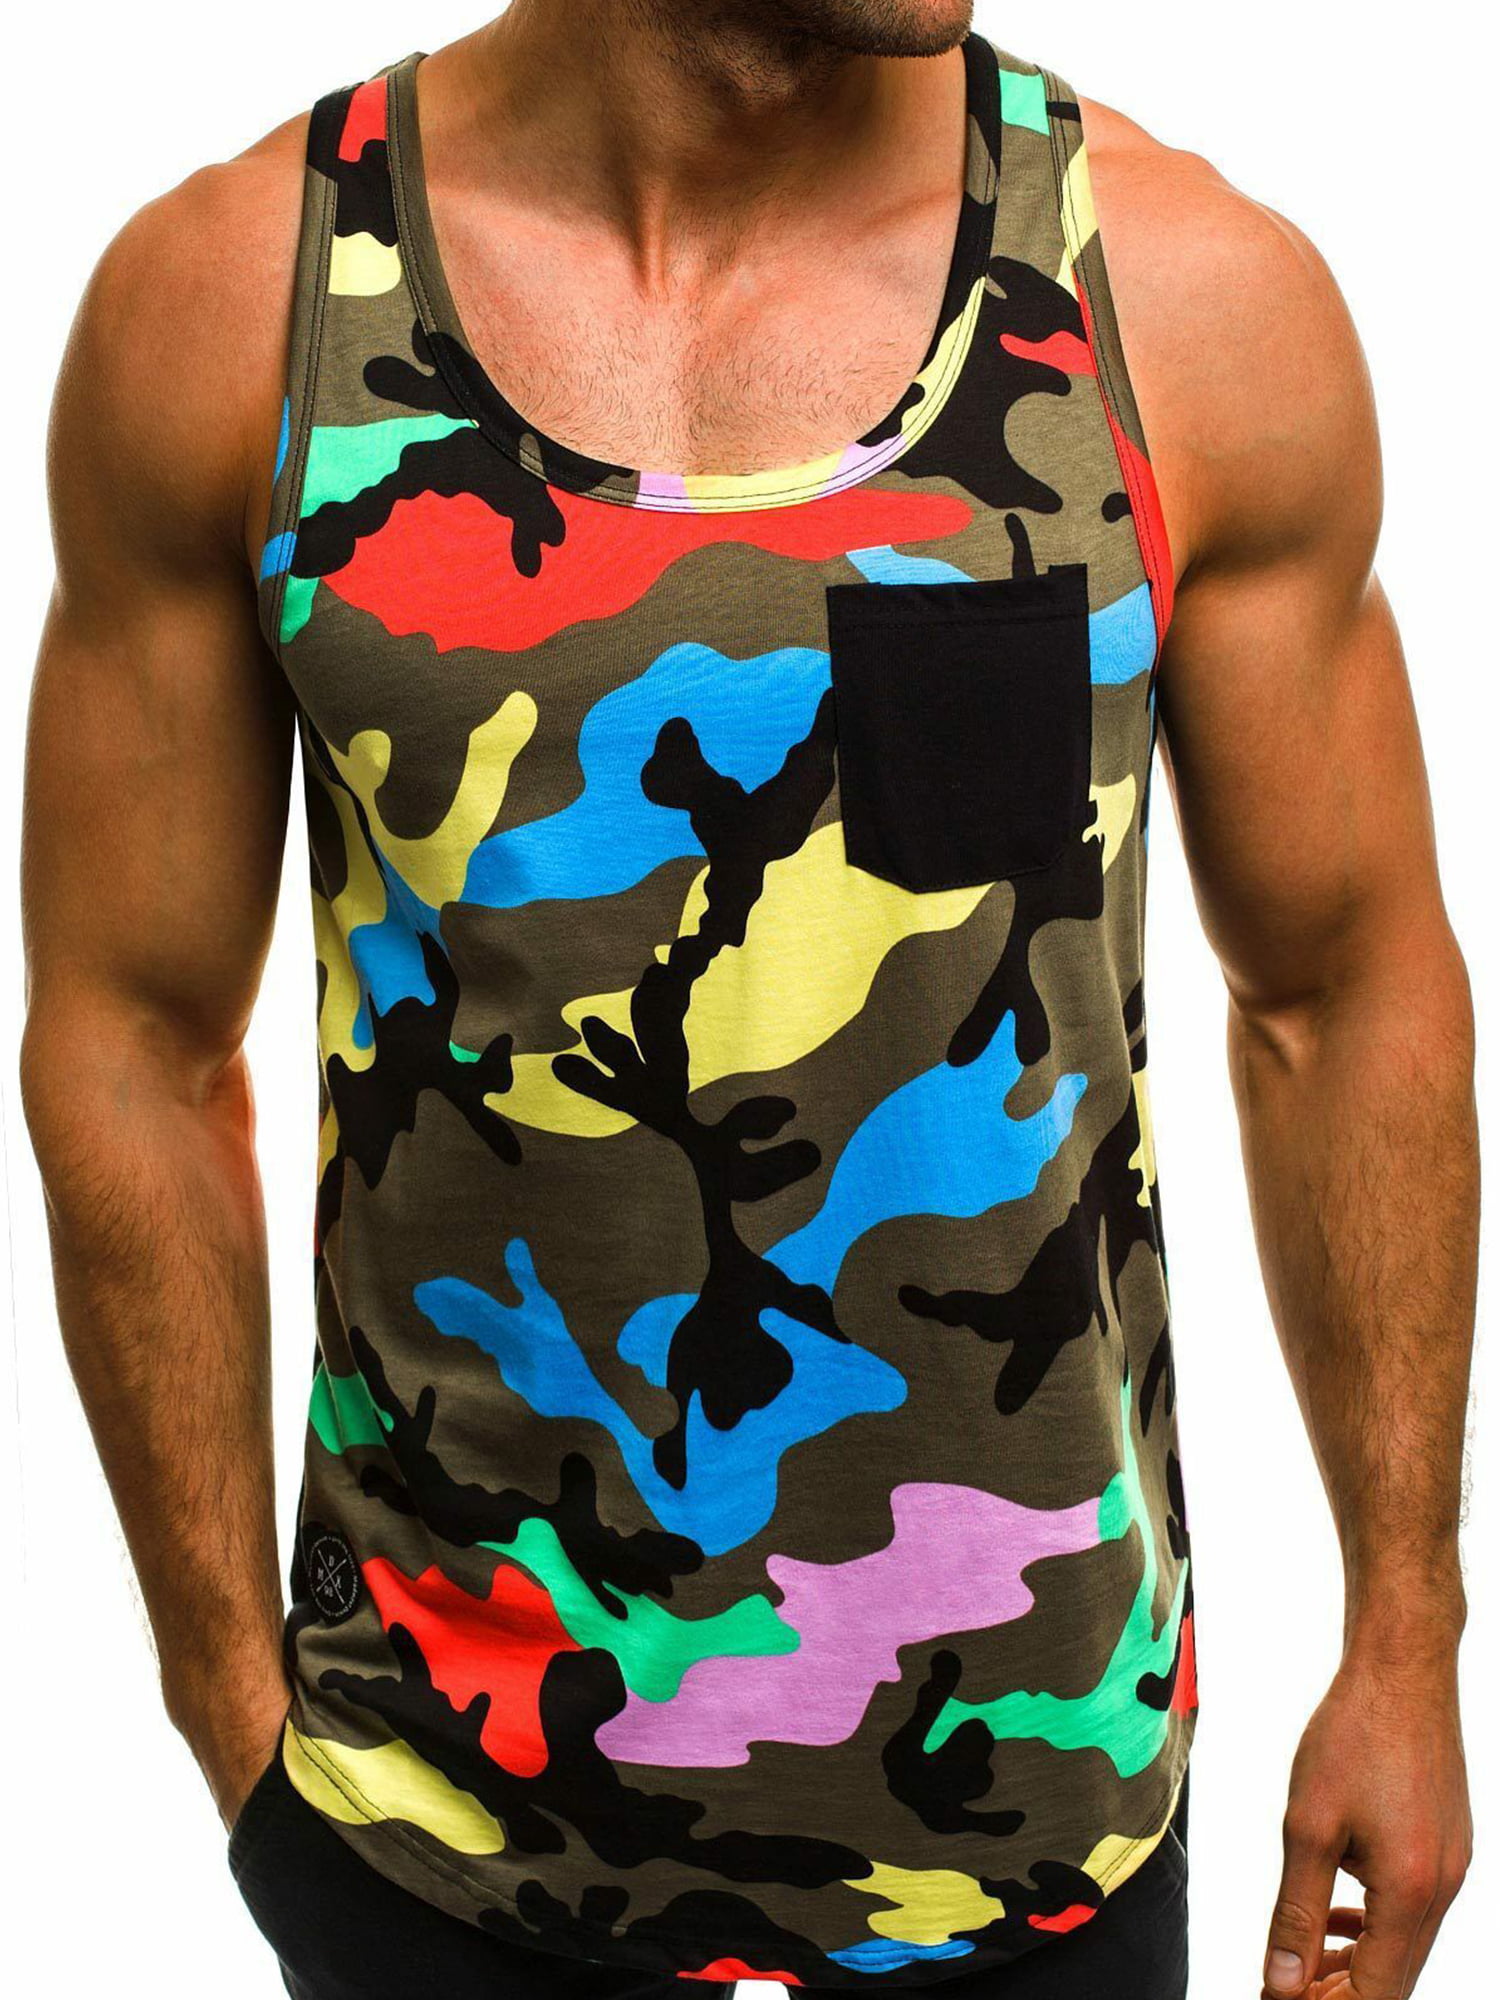 Summer Fashion Camouflage Printing Sleeveless Leisure Sports Vest Tops,Gray,M,United States